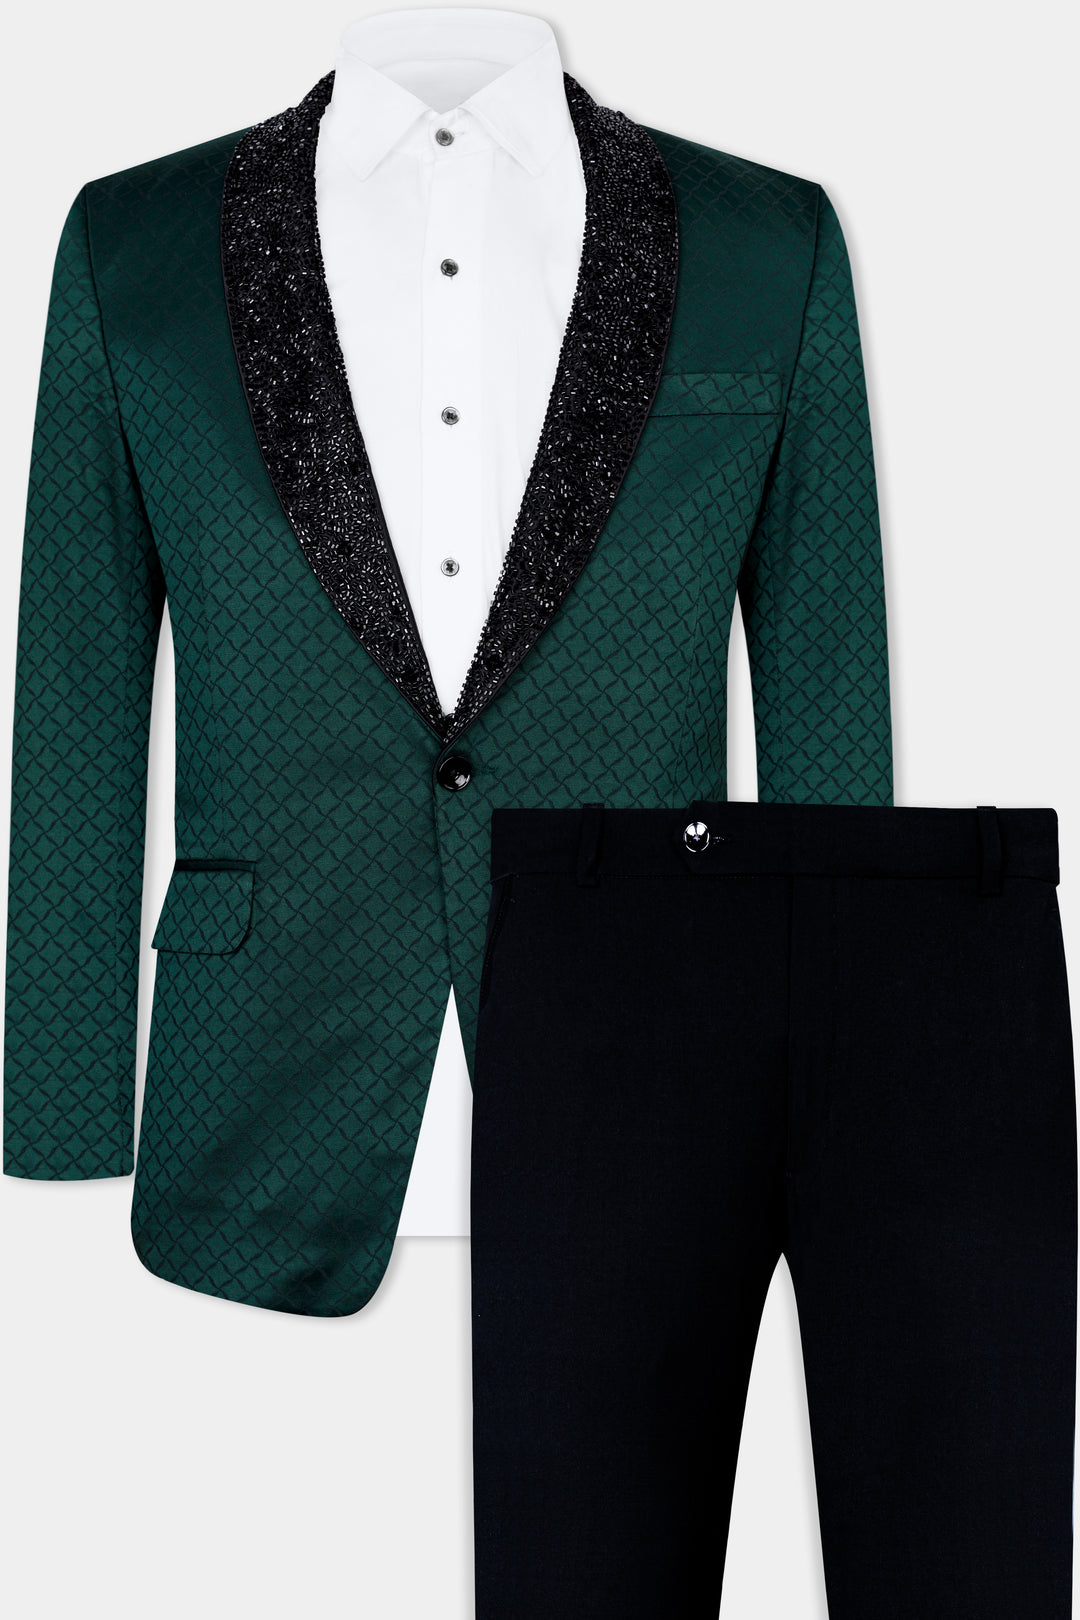 10 Best New Year Party Outfits For Men To Look Dazzling